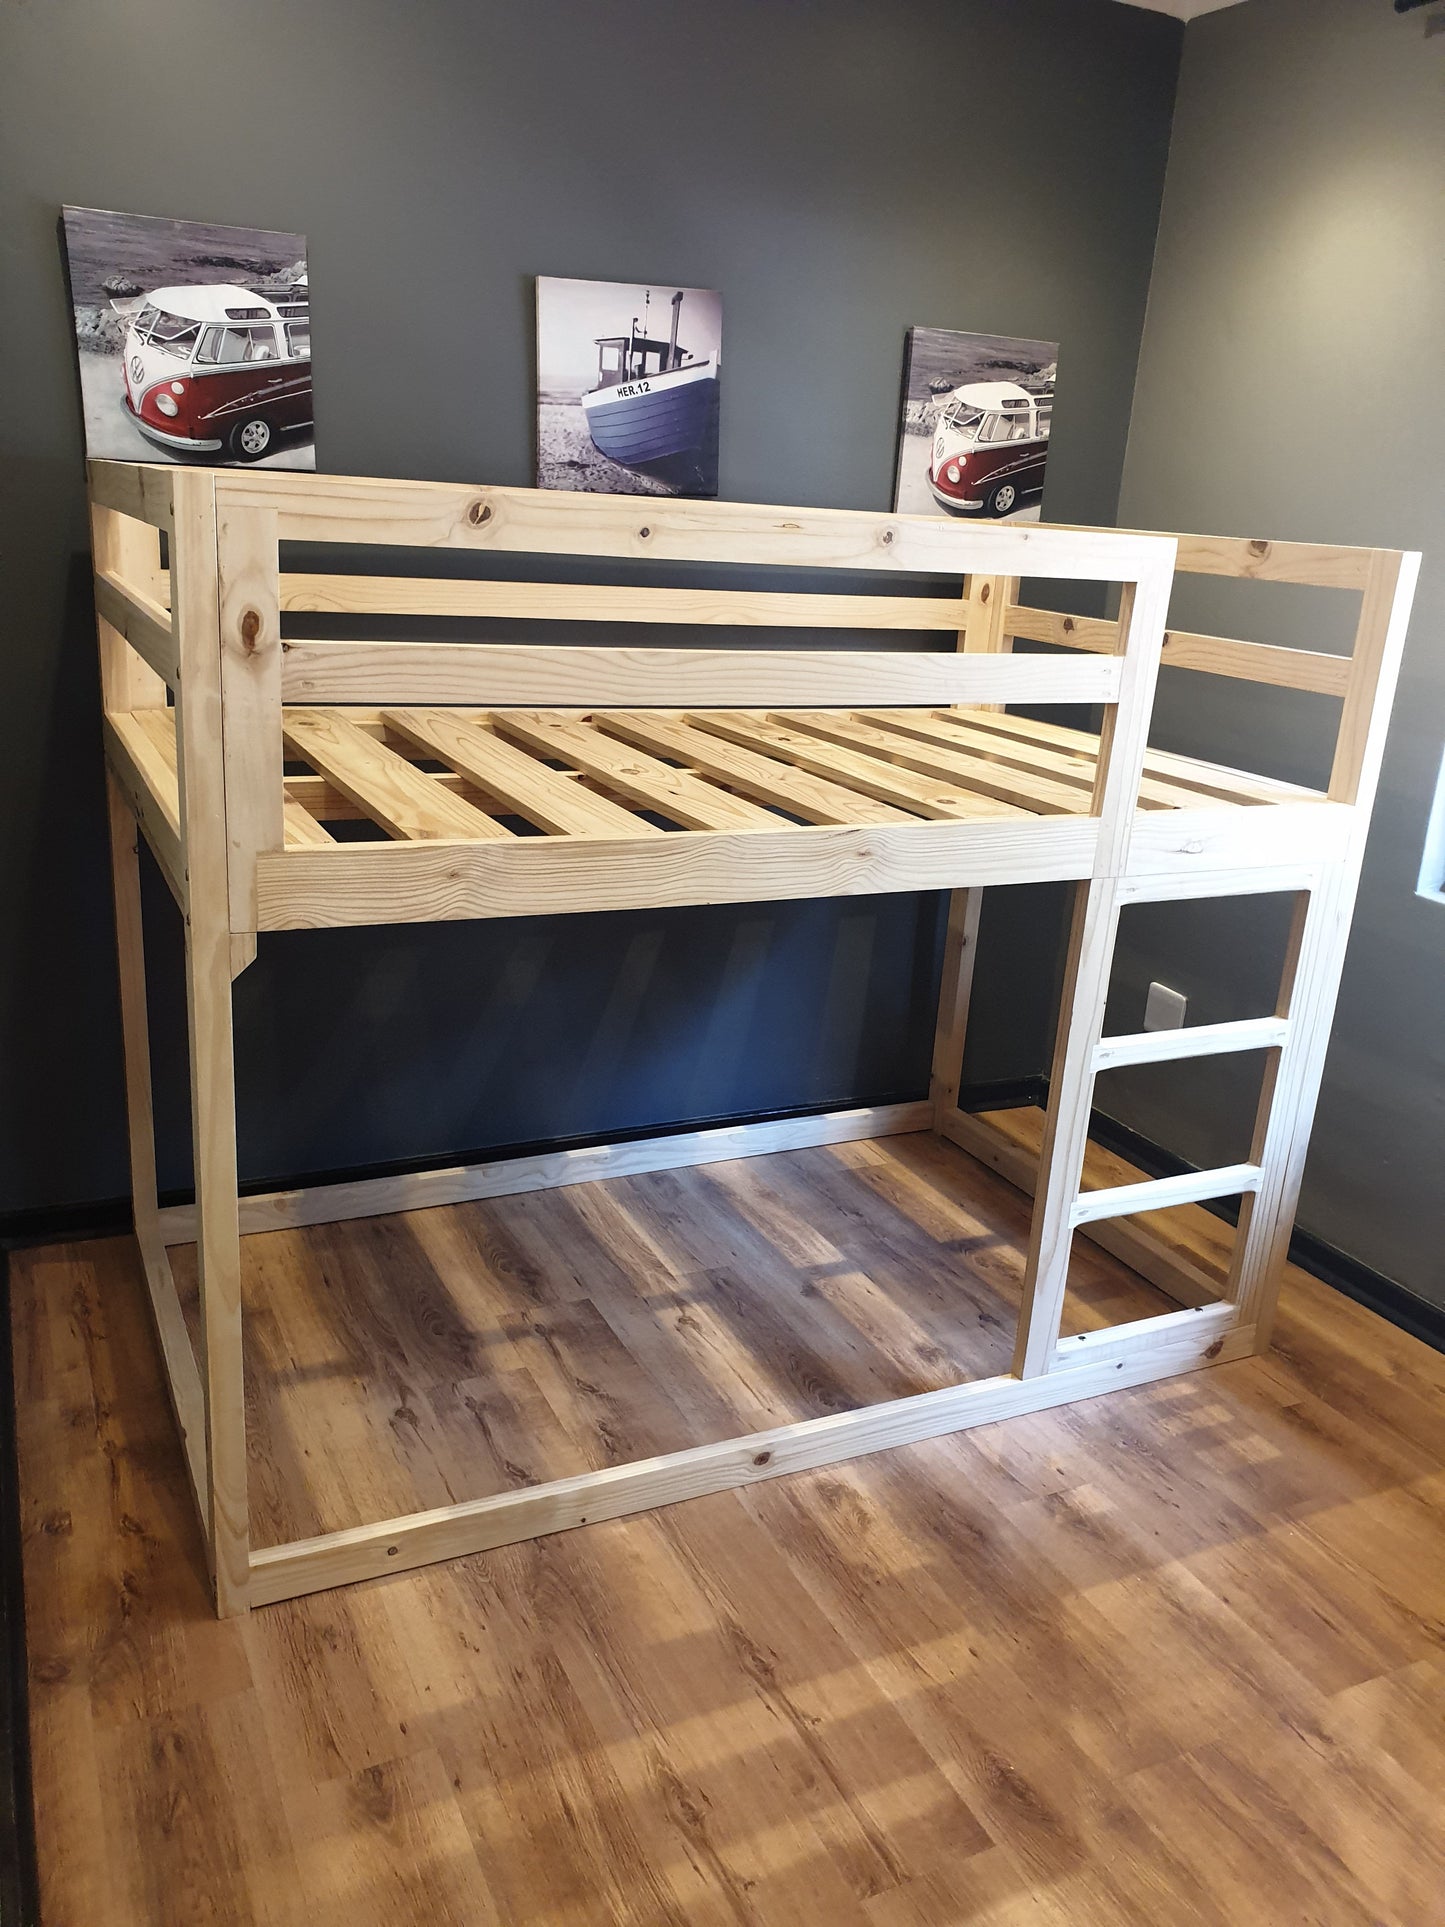 Mickey Bunk Bed - Furniture